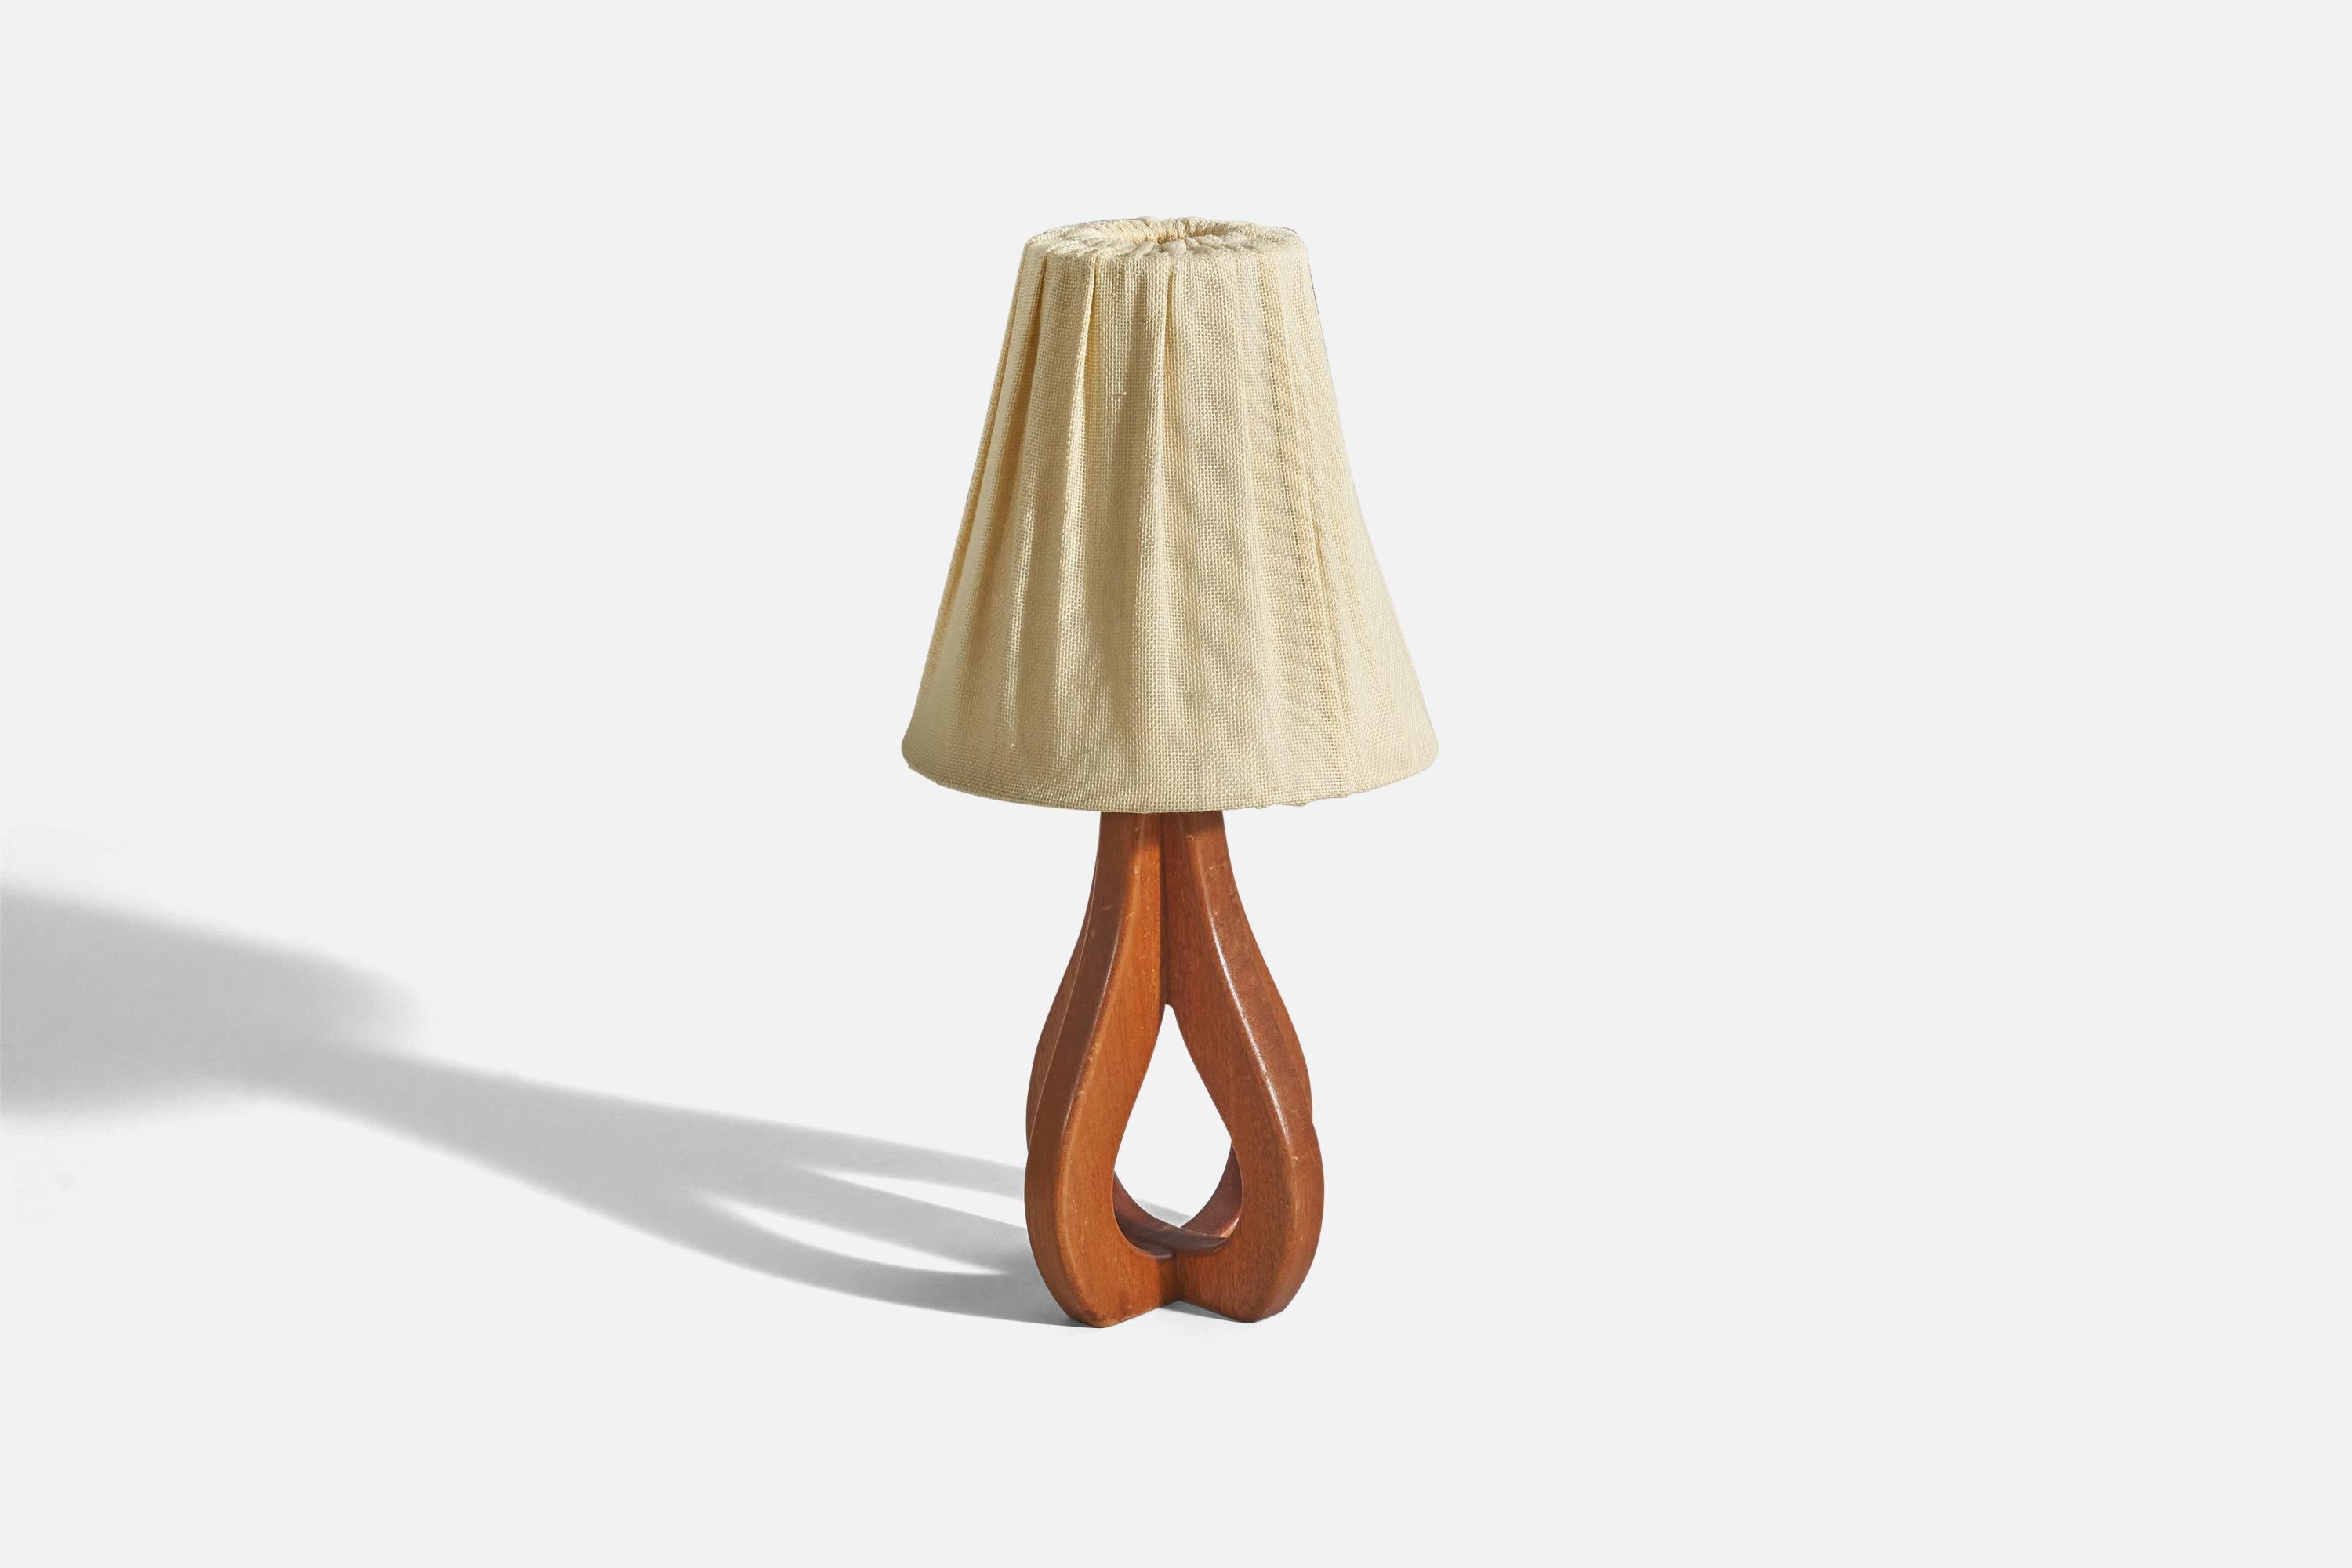 A teak and fabric table lamp designed and produced in Sweden, c. 1950s. 

Sold with lampshade. 
Dimensions of Lamp (inches) : 11.87 x 5.81 x 5.81 (height x width x depth)
Dimensions of Shade (inches) : 4 x 8 x 8 (top diameter x bottom diameter x